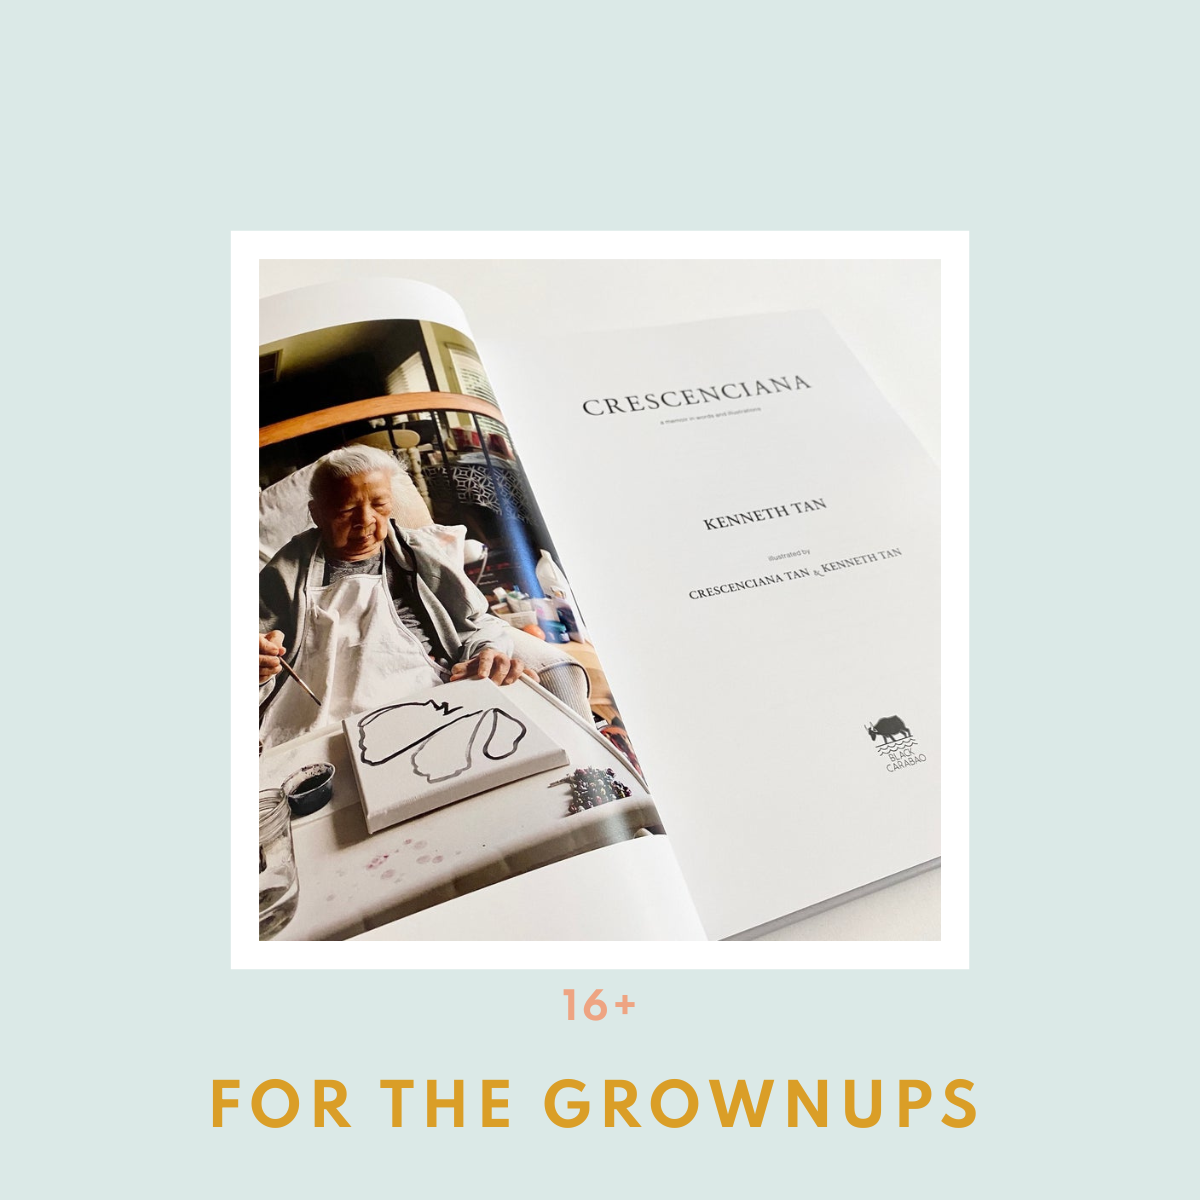 For the Grownups (16+)